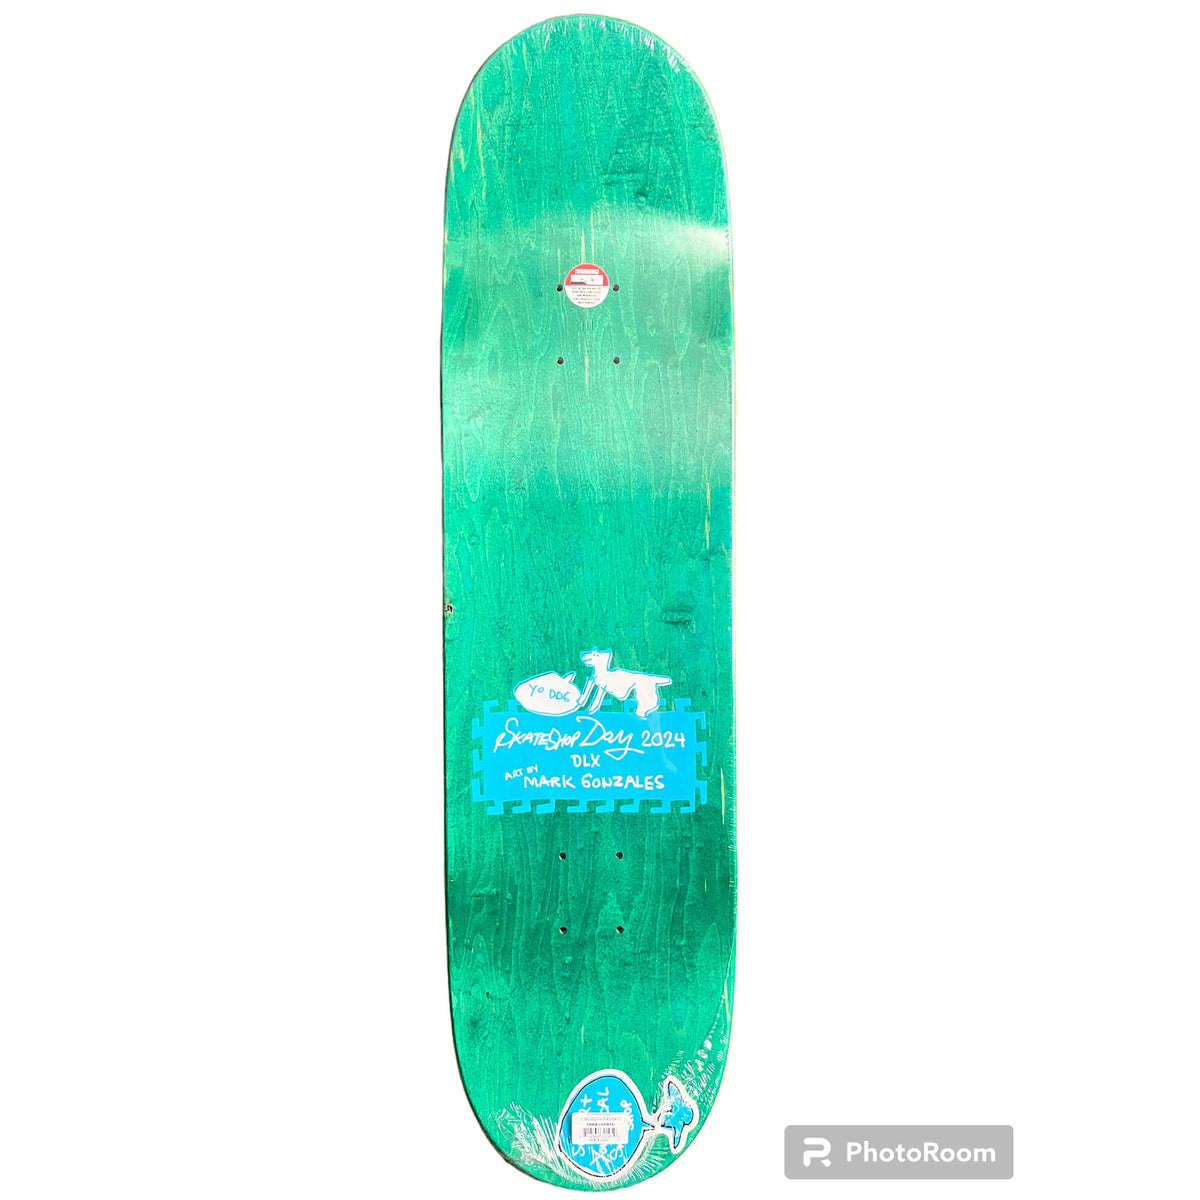 Deluxe x Skate Shop Day 2024 Limited Edition Skateboard Deck 8.5" Blue